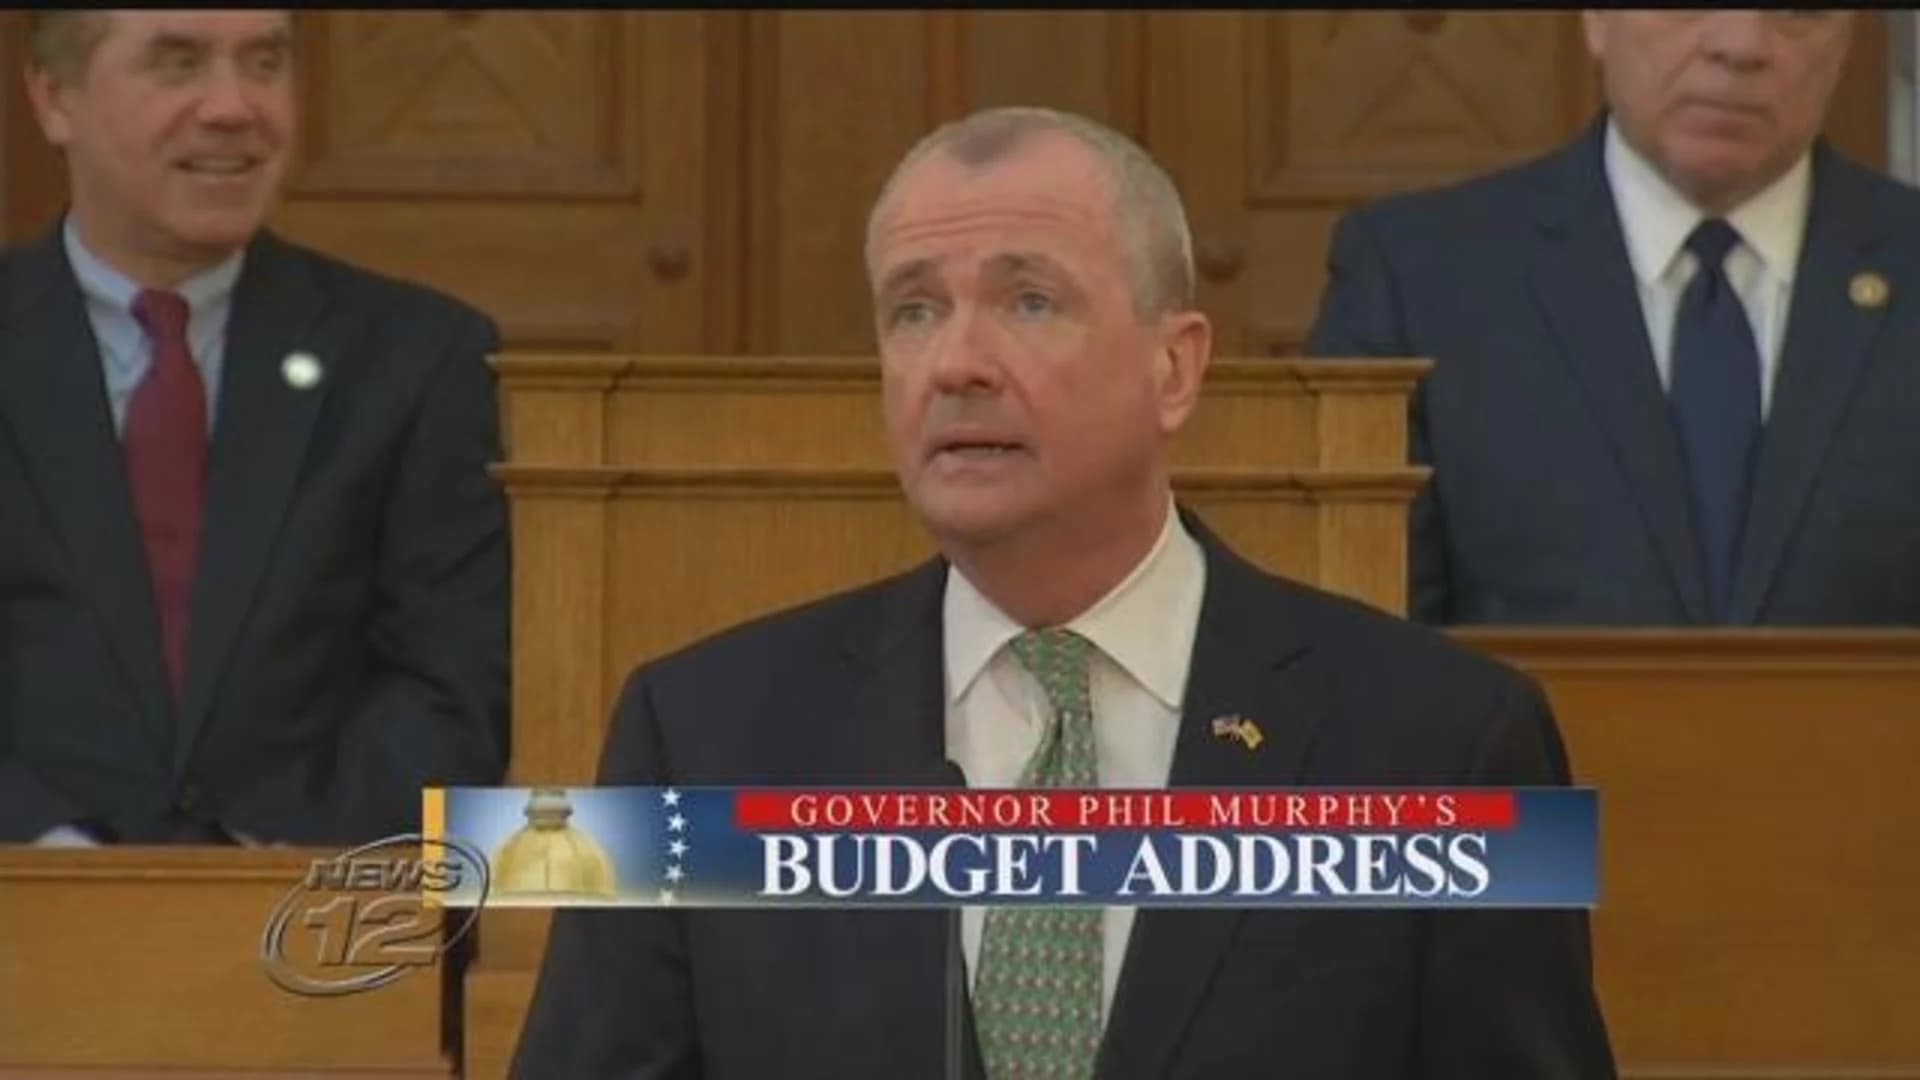 Gov. Murphy unveils $38.6B state budget for 2020 fiscal year